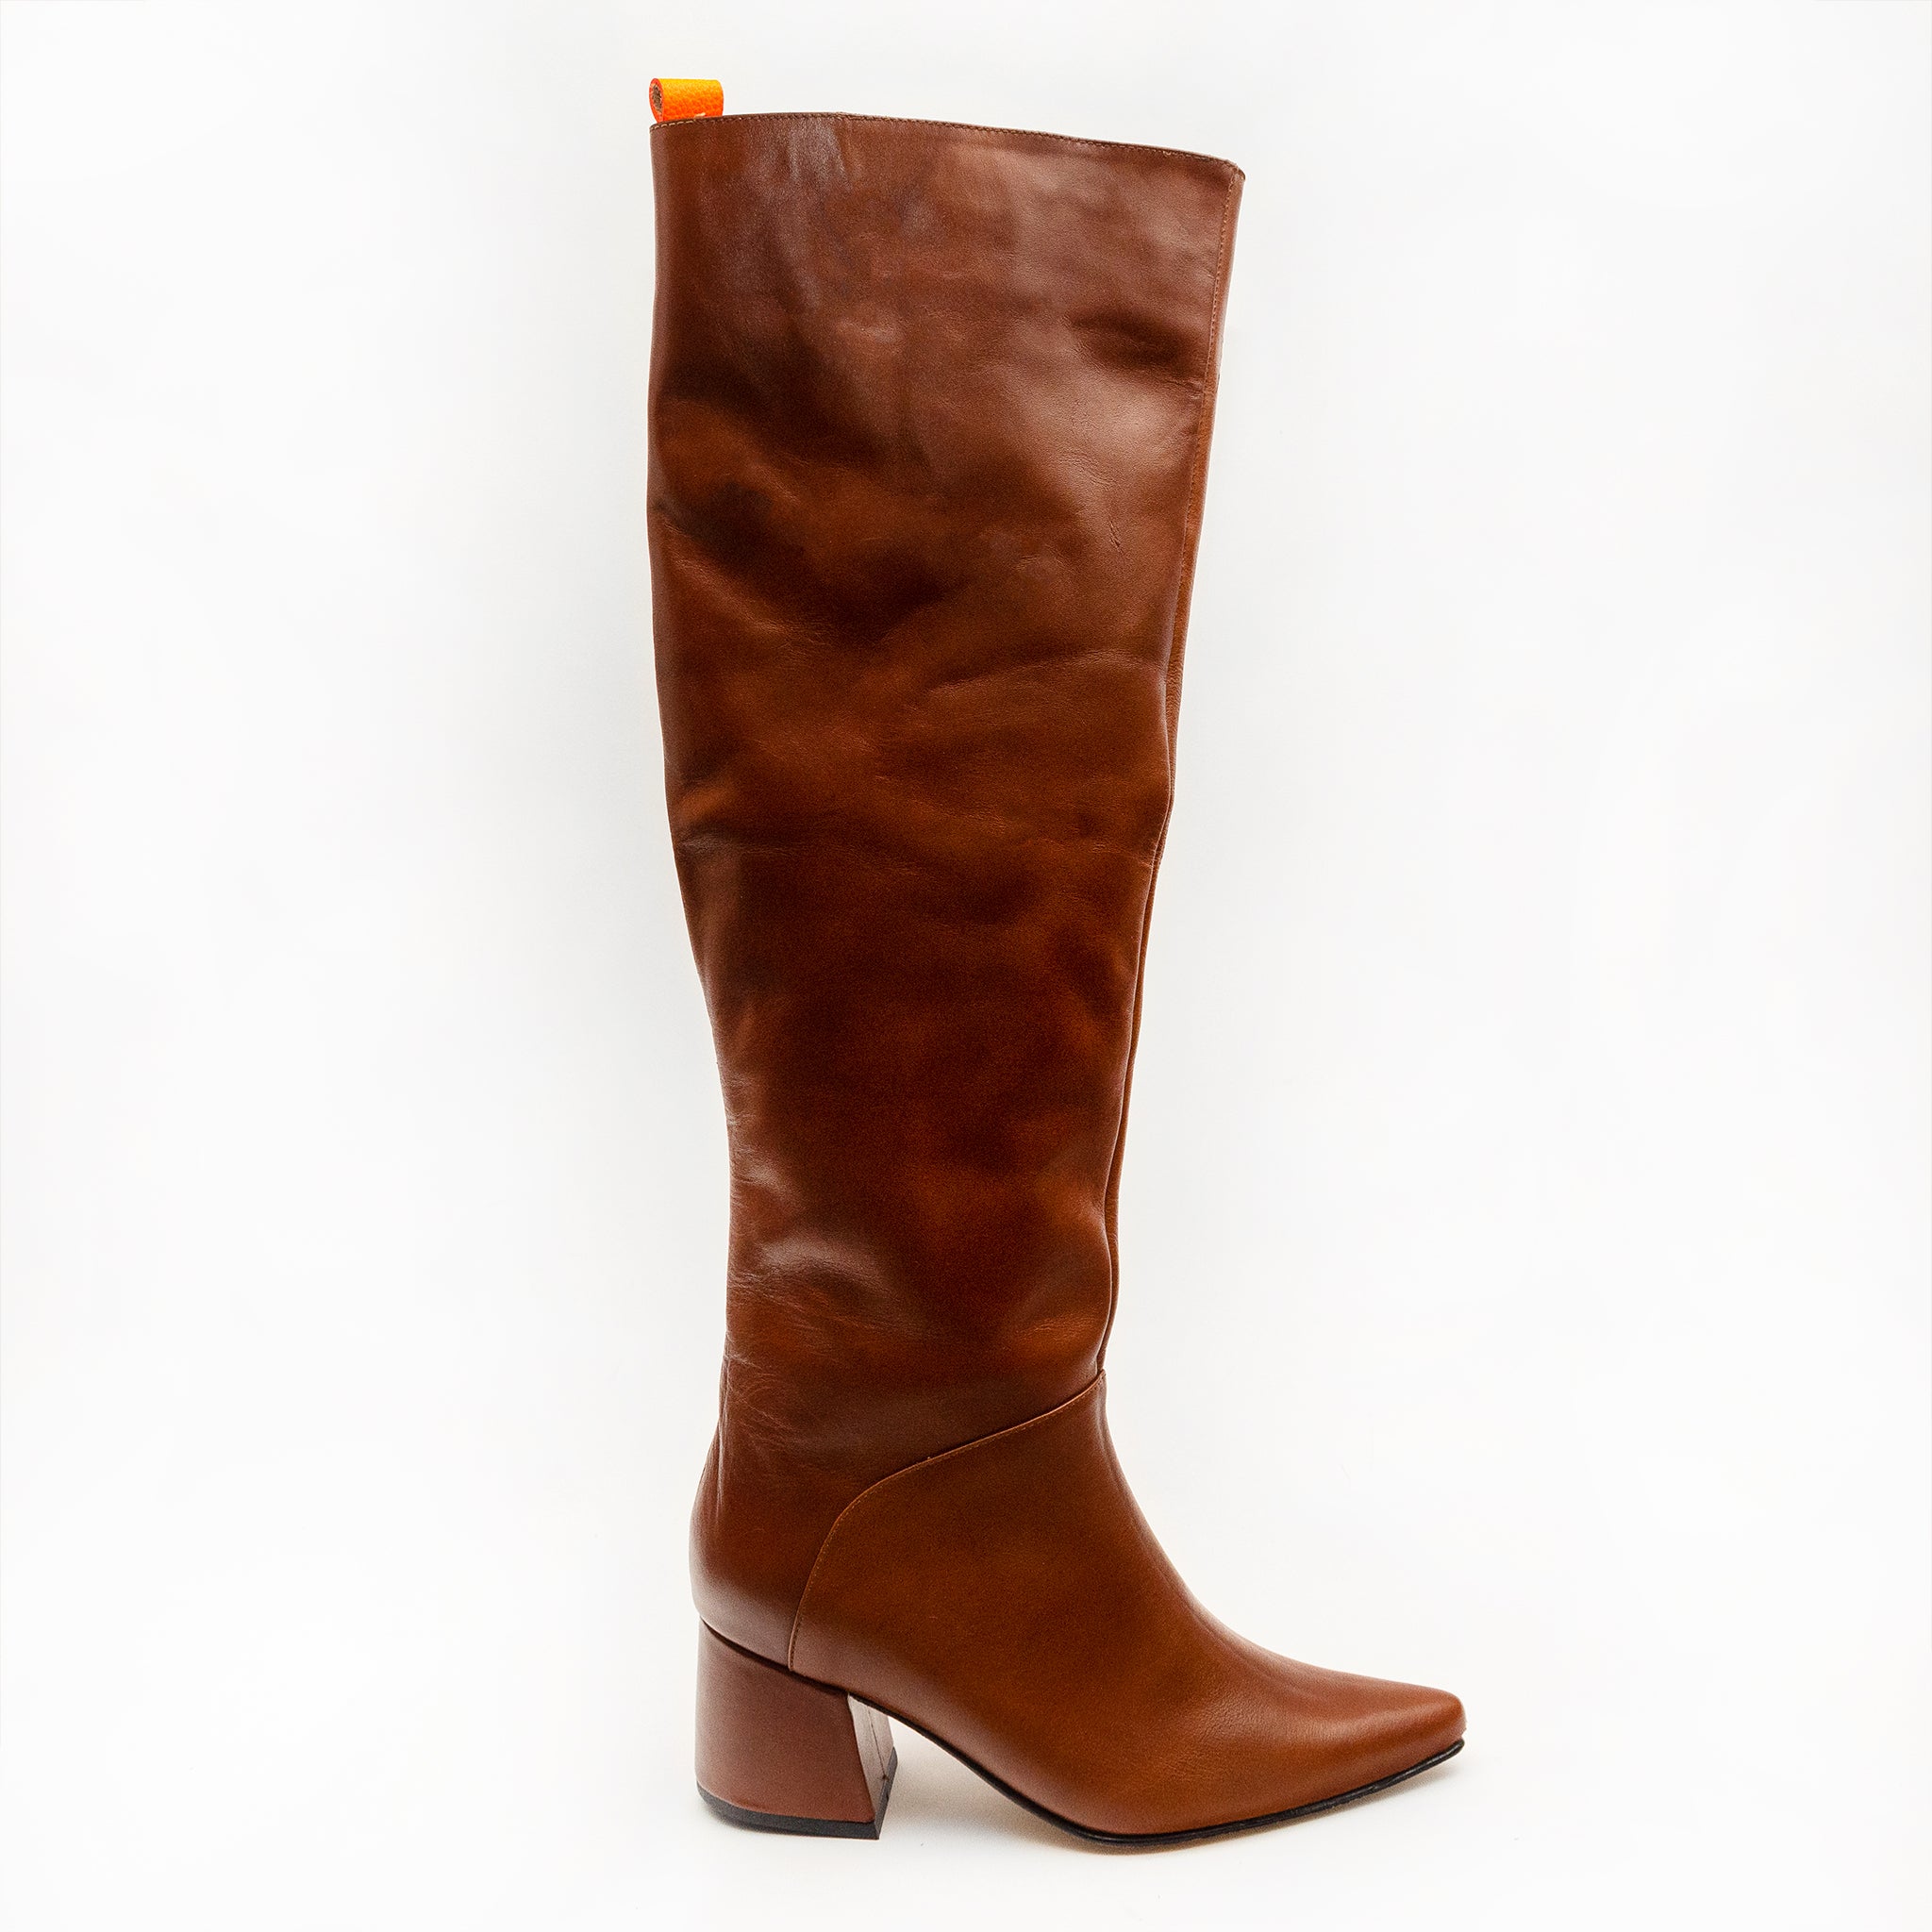 KNEE high BOOTS - caramelo -